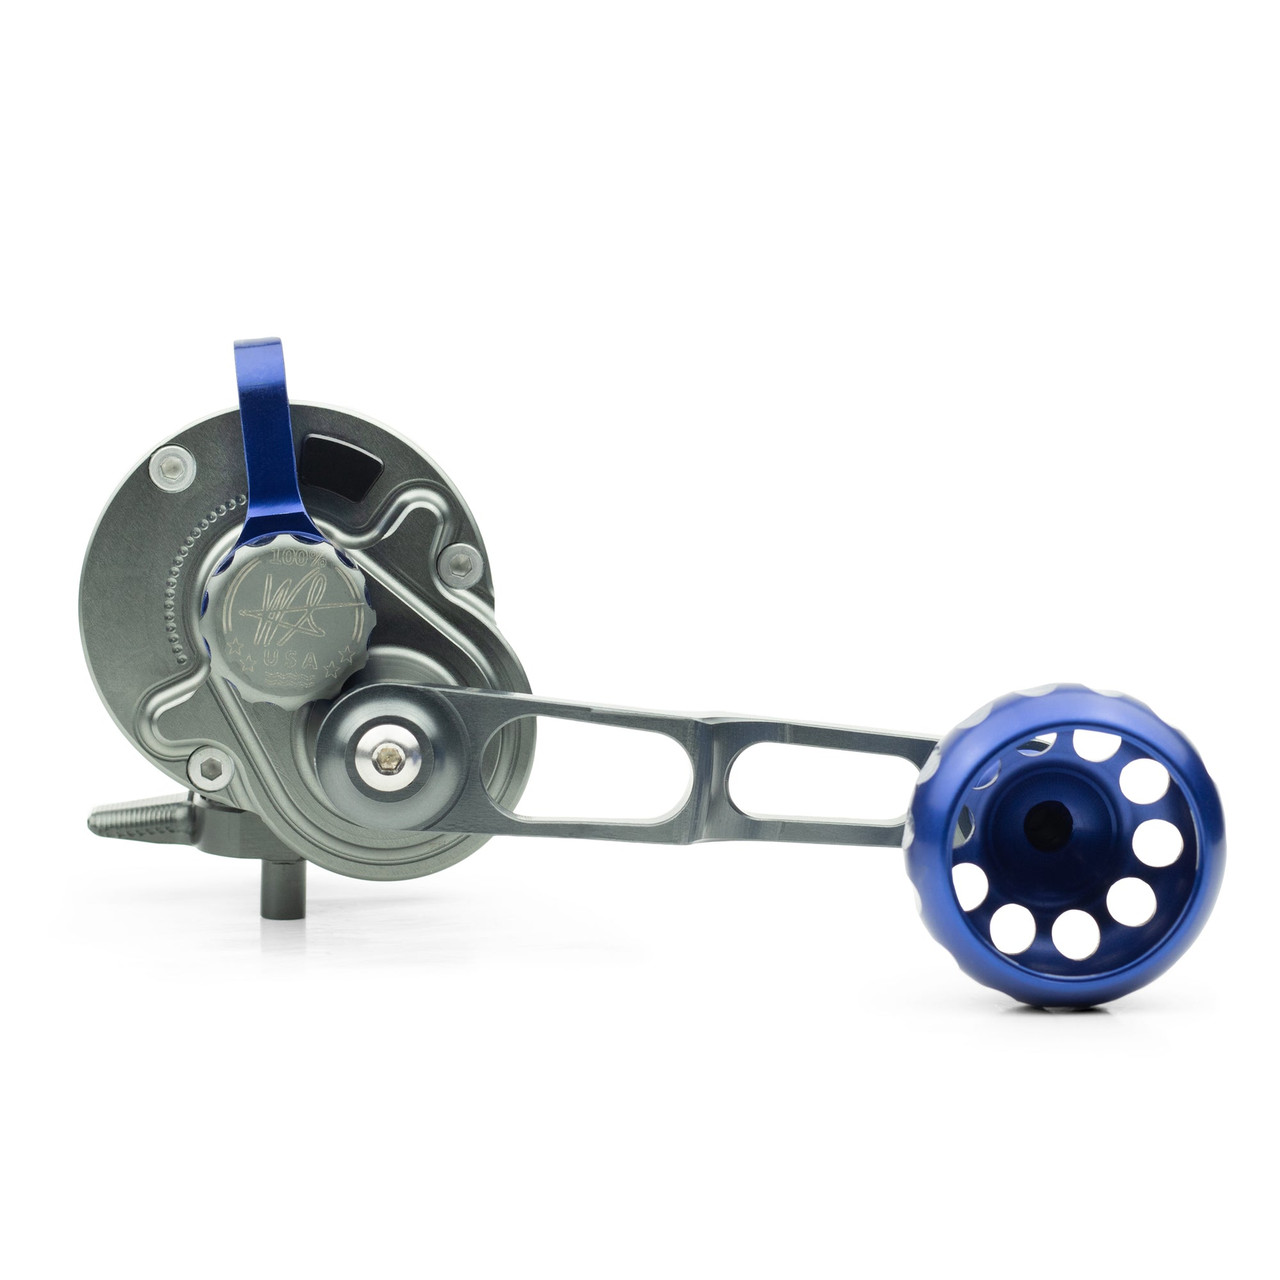 Seigler SGN Lever Drag (Slow Pitch) Conventional Reels